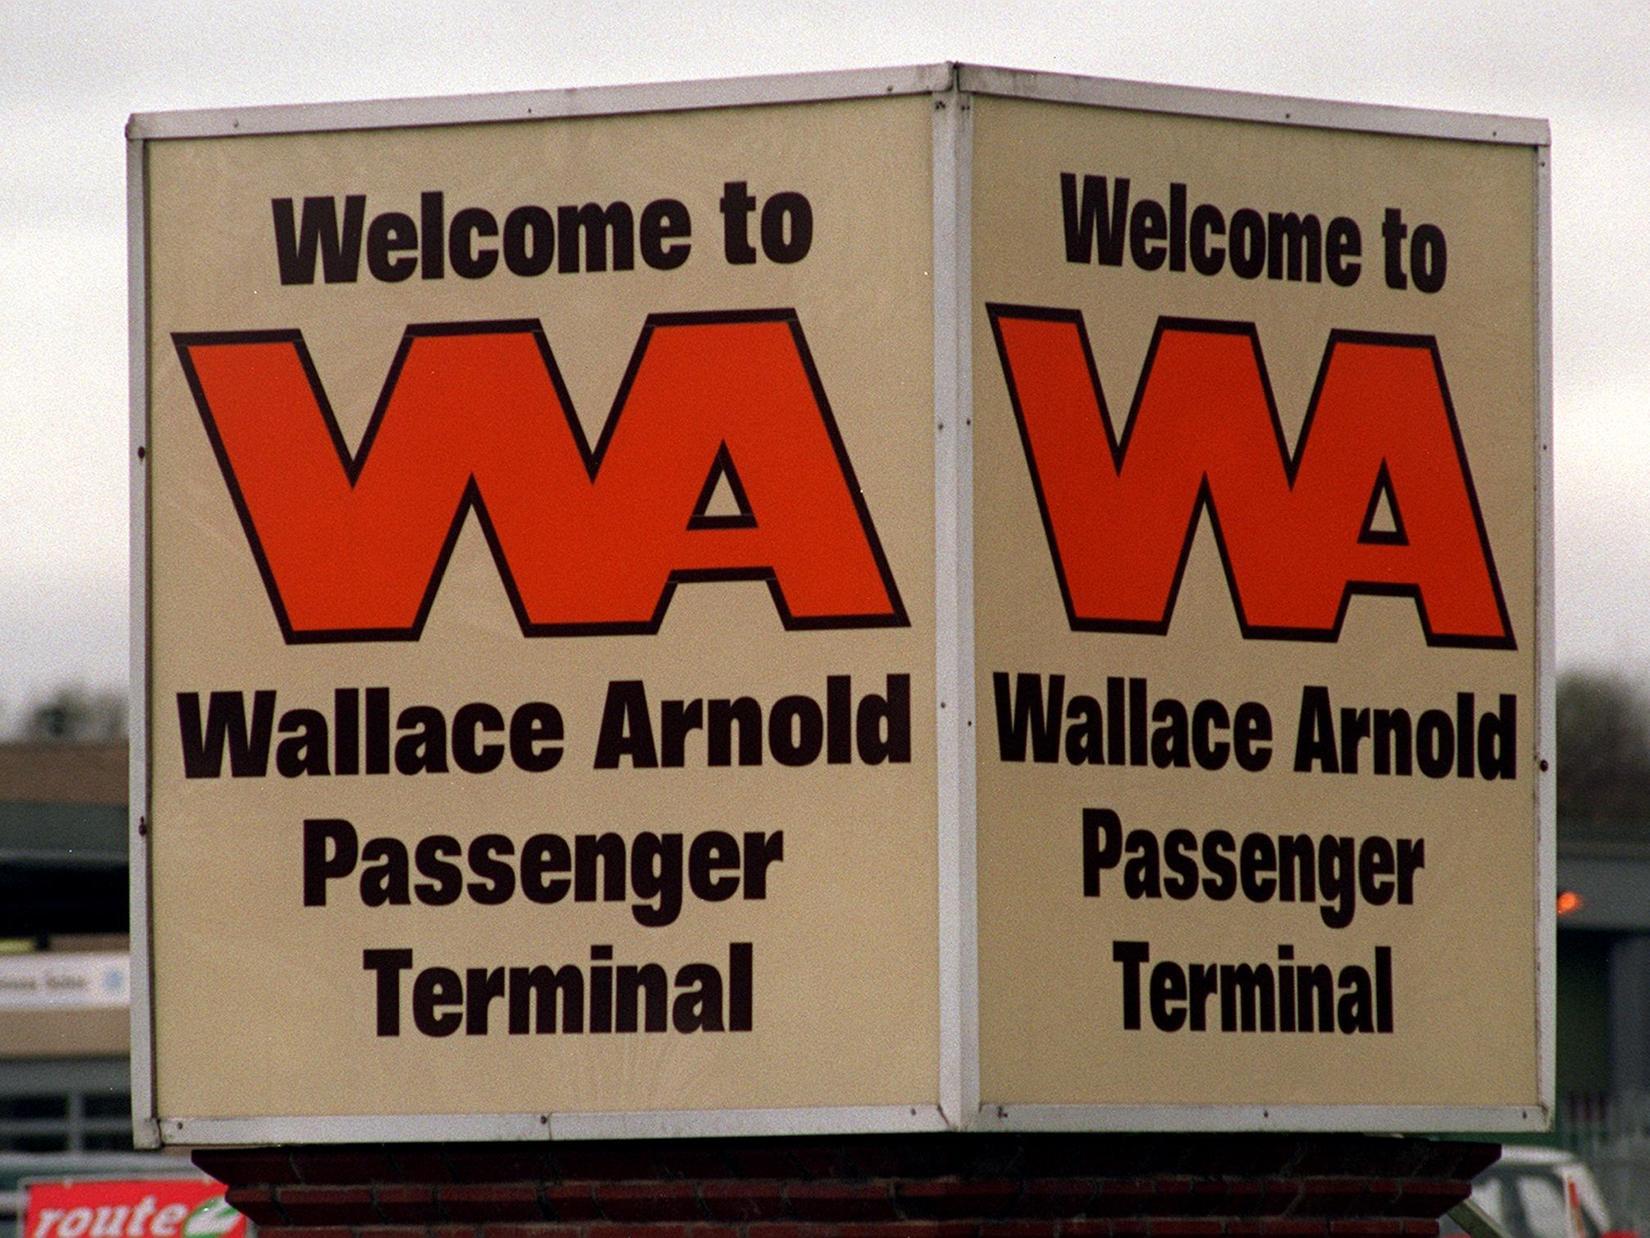 What are your memories of Wallace Arnold?